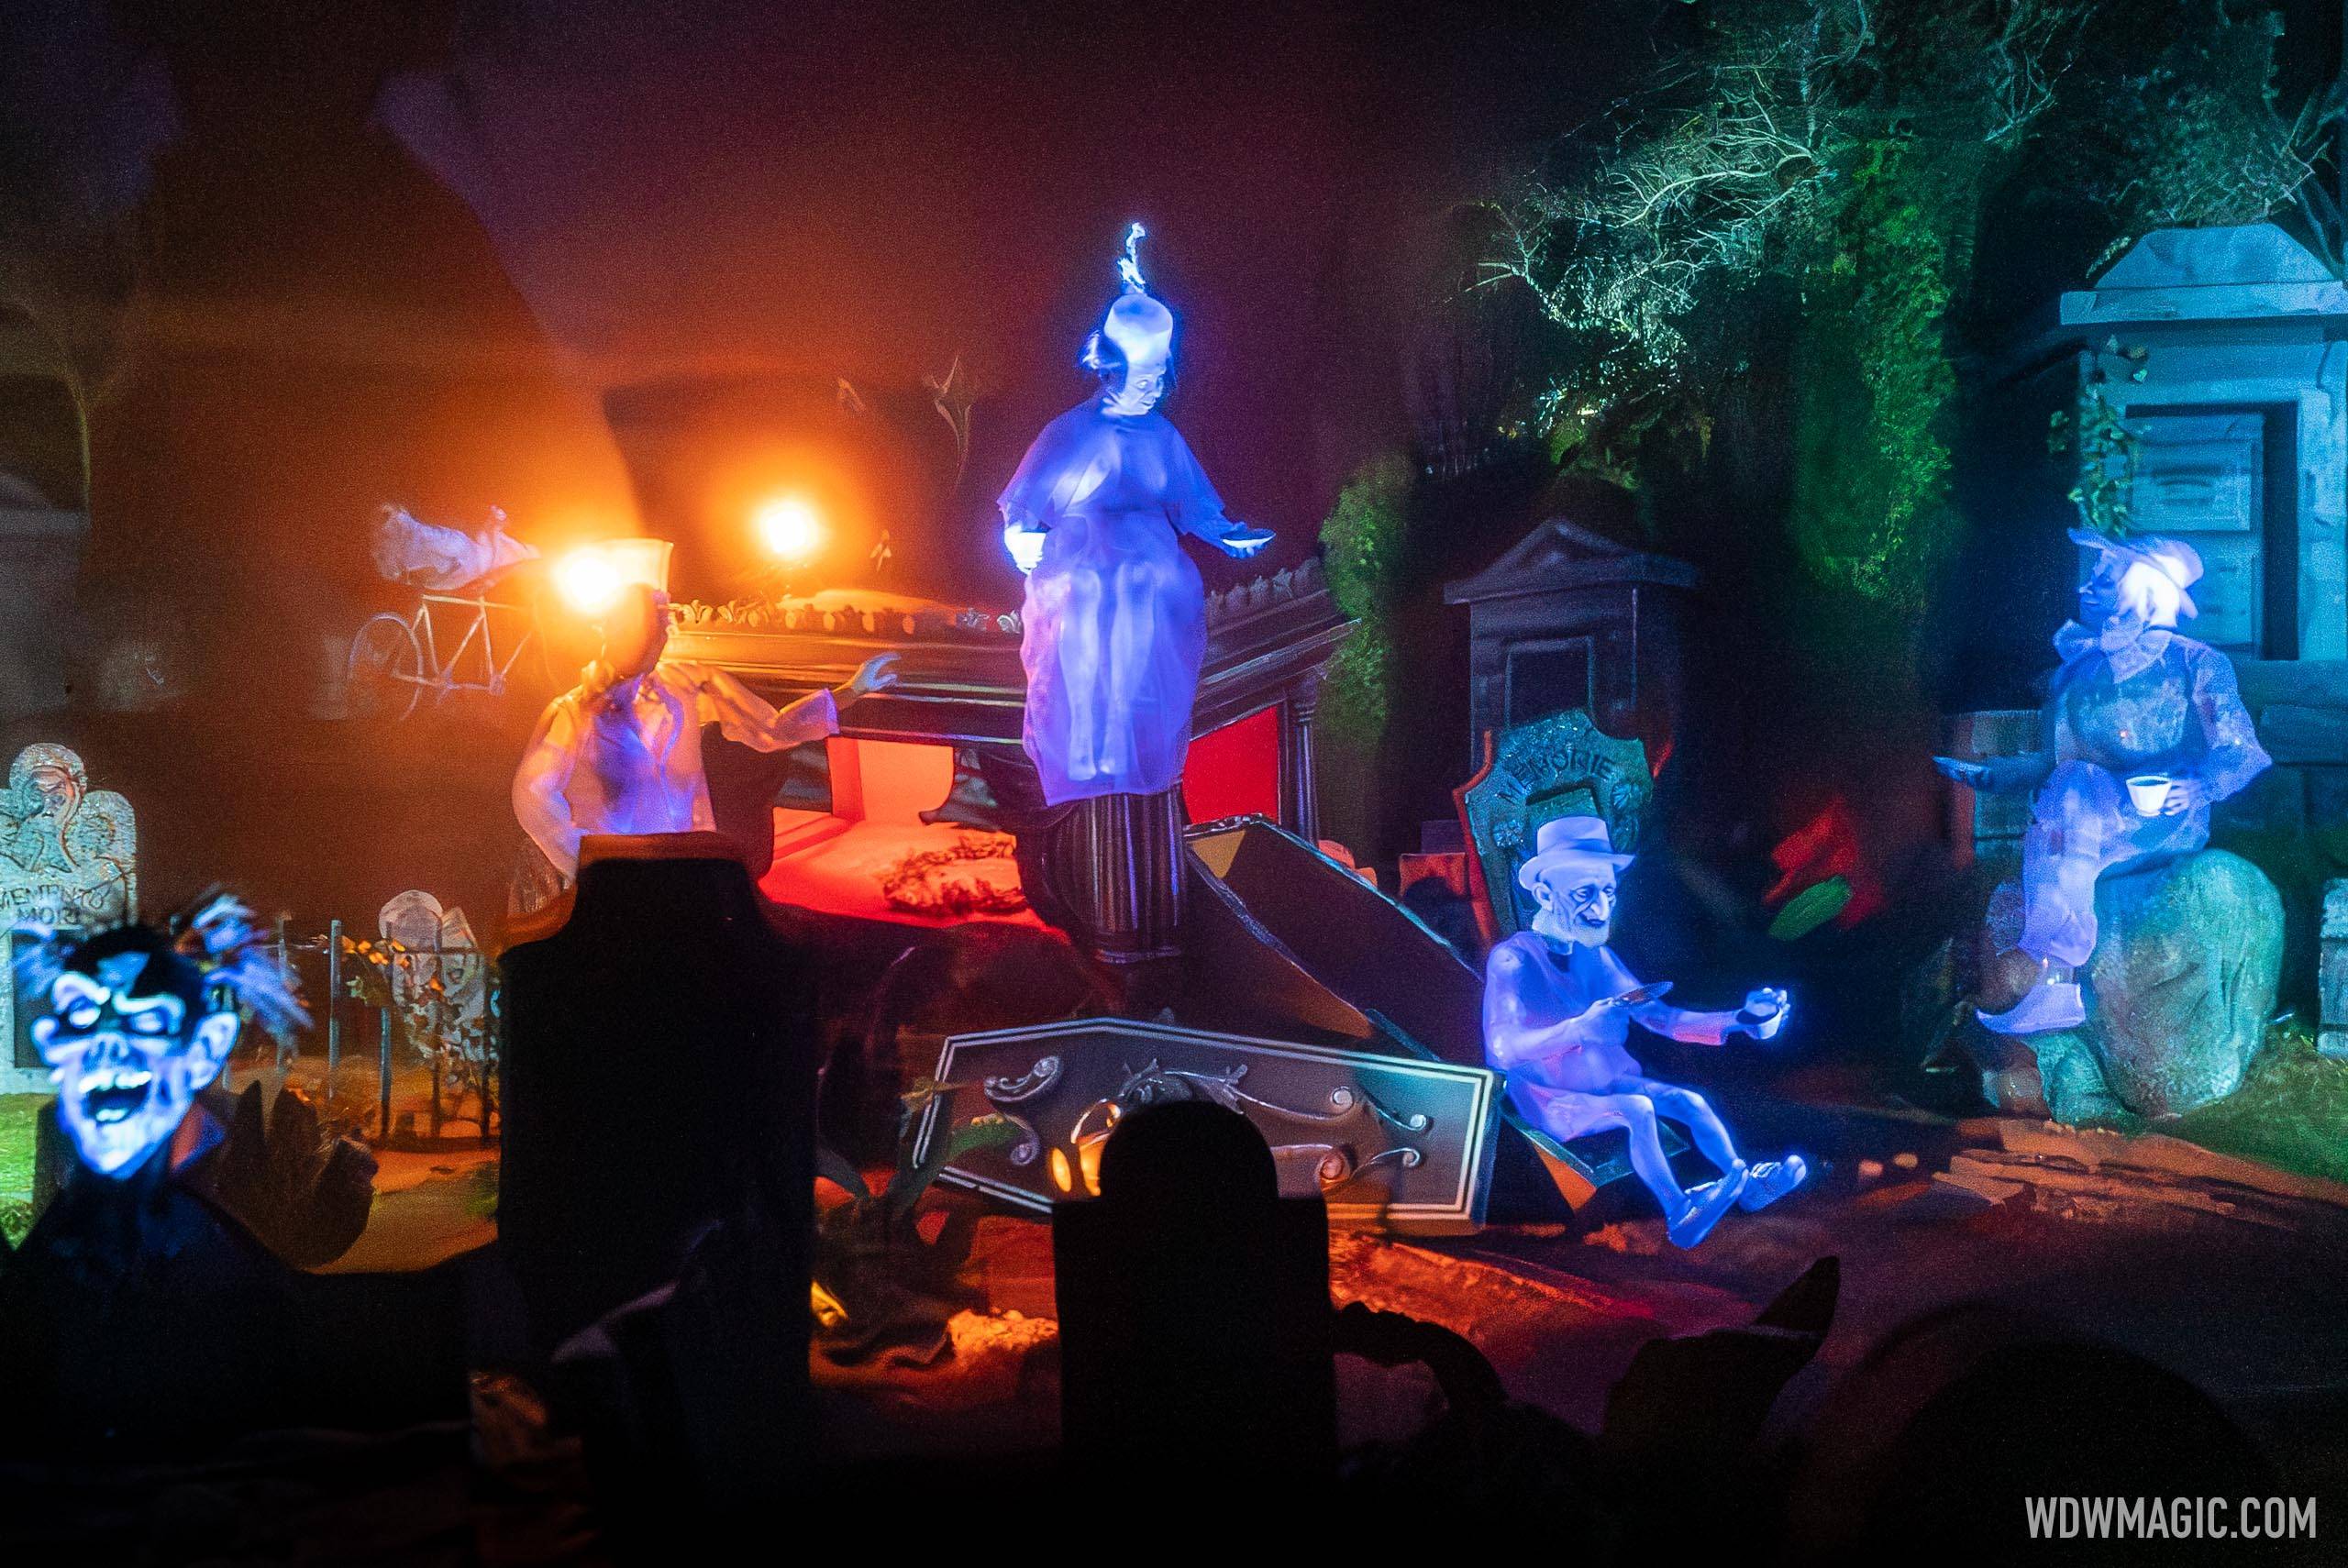 Updated lighting effect materializes at Walt Disney World's Haunted Mansion